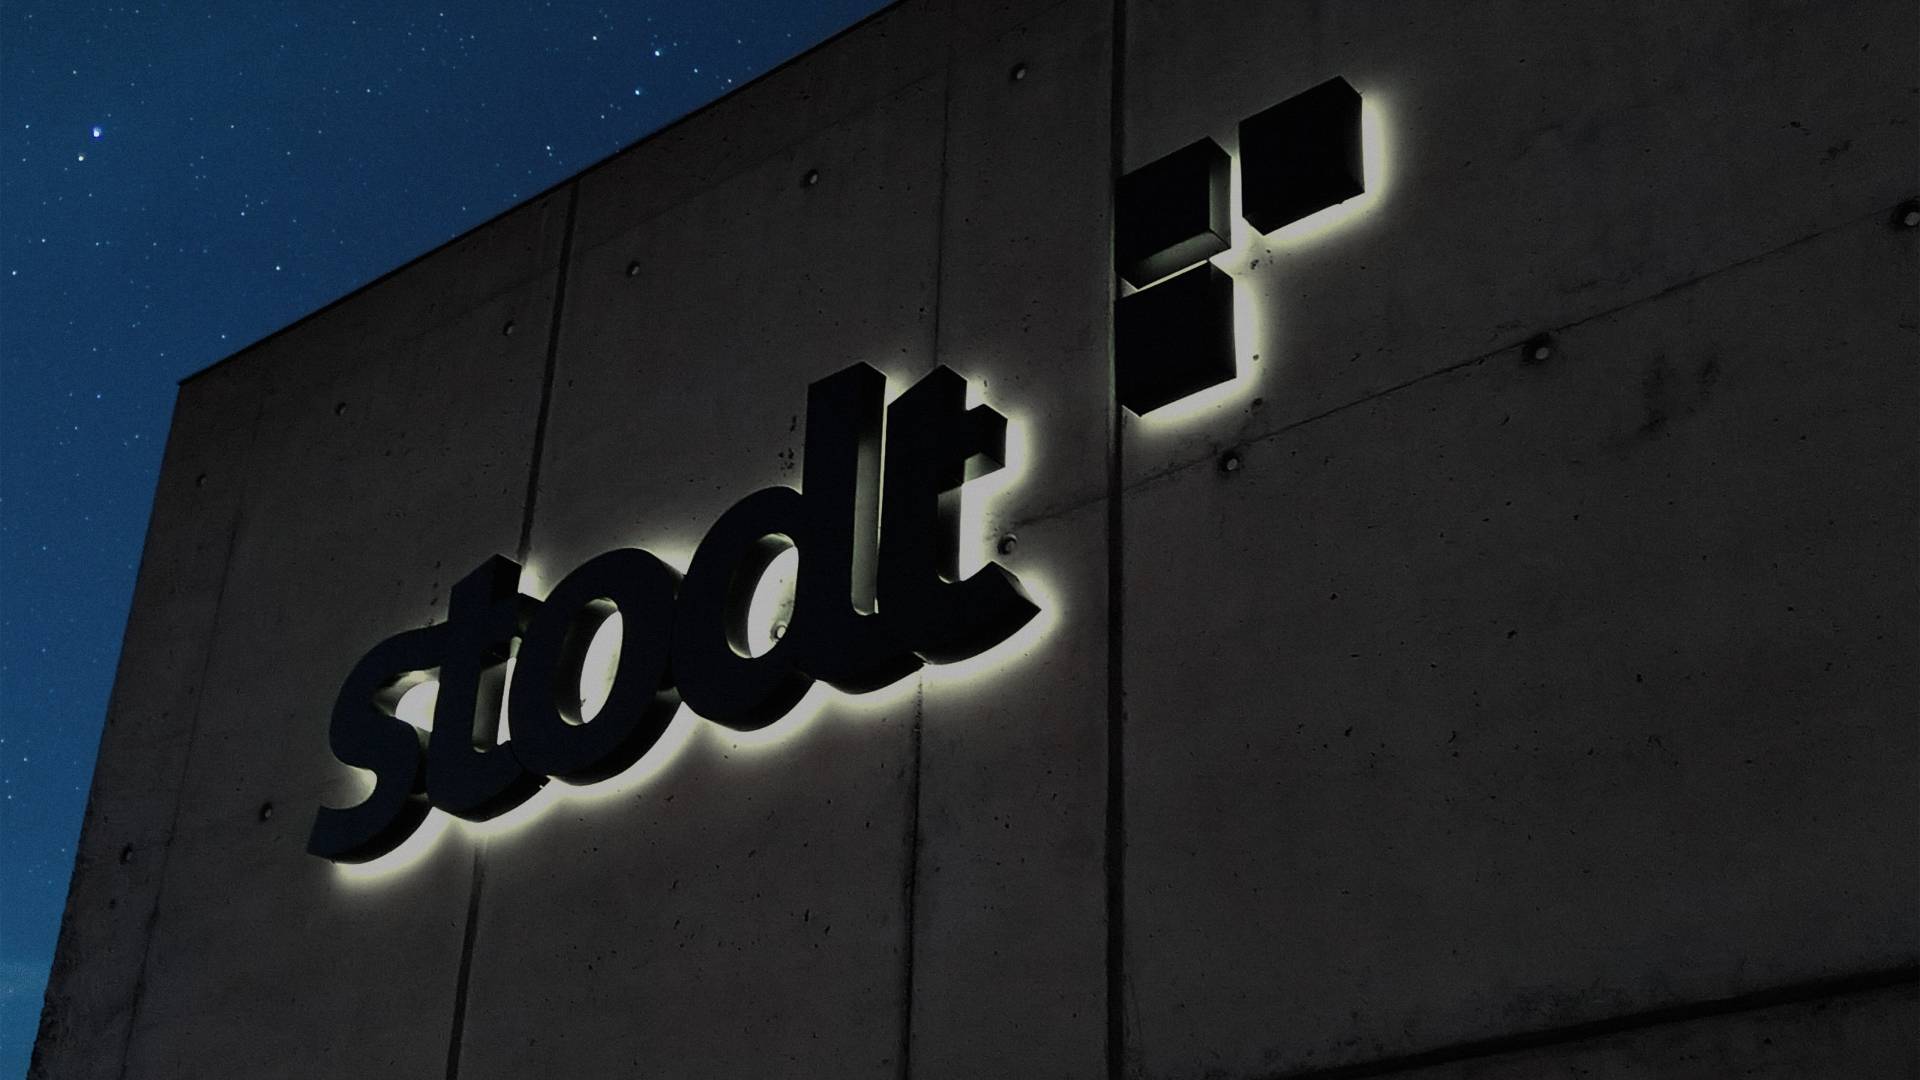 stodt logo on the wall in darkness